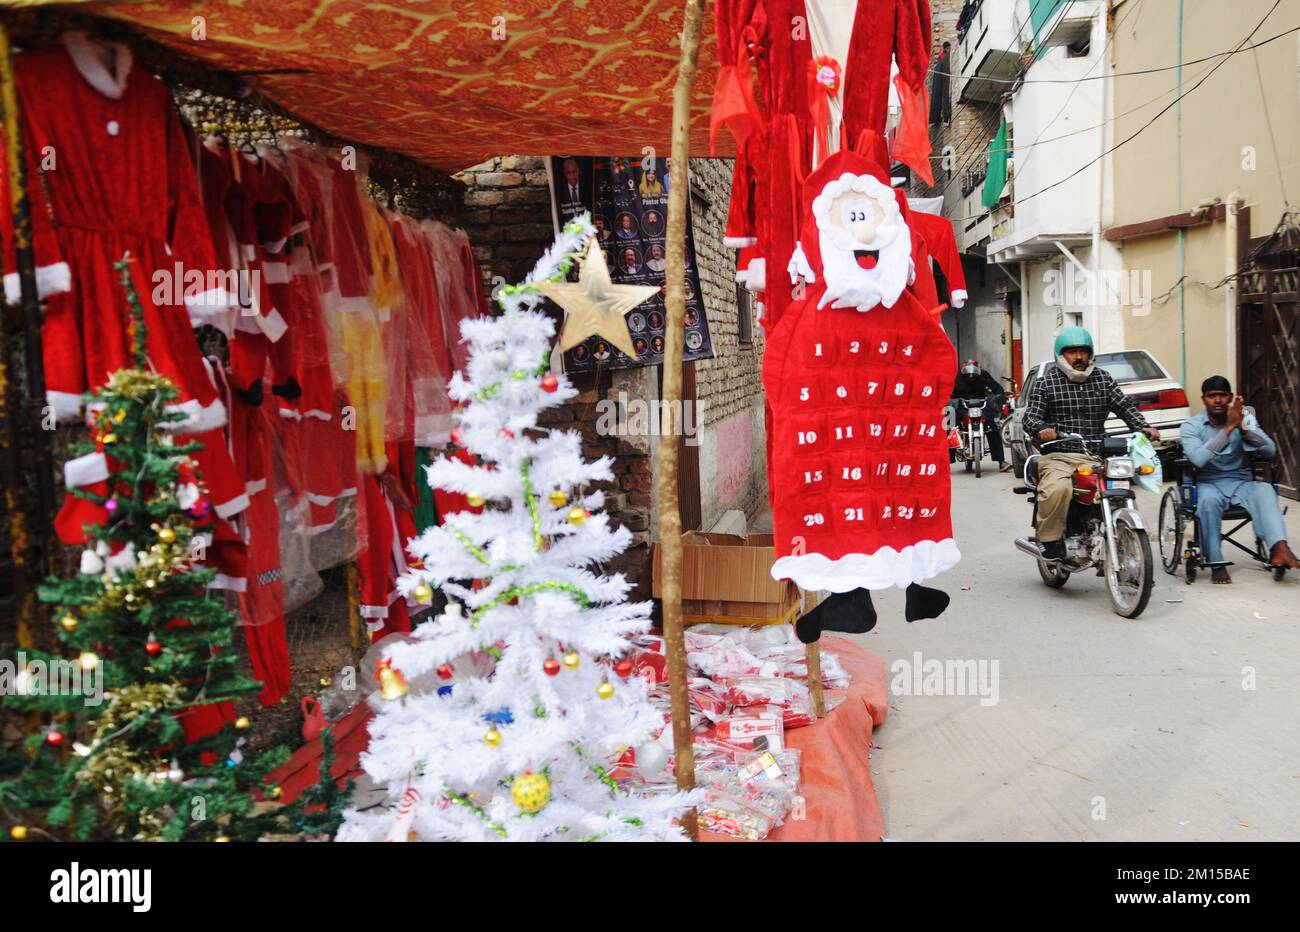 ISLAMABAD, PAKISTAN.A vendor is displaying and selling Santa Claus outfits for the Christmas festival at G-7/2.Photo by Raja Imran Bahadar Stock Photo